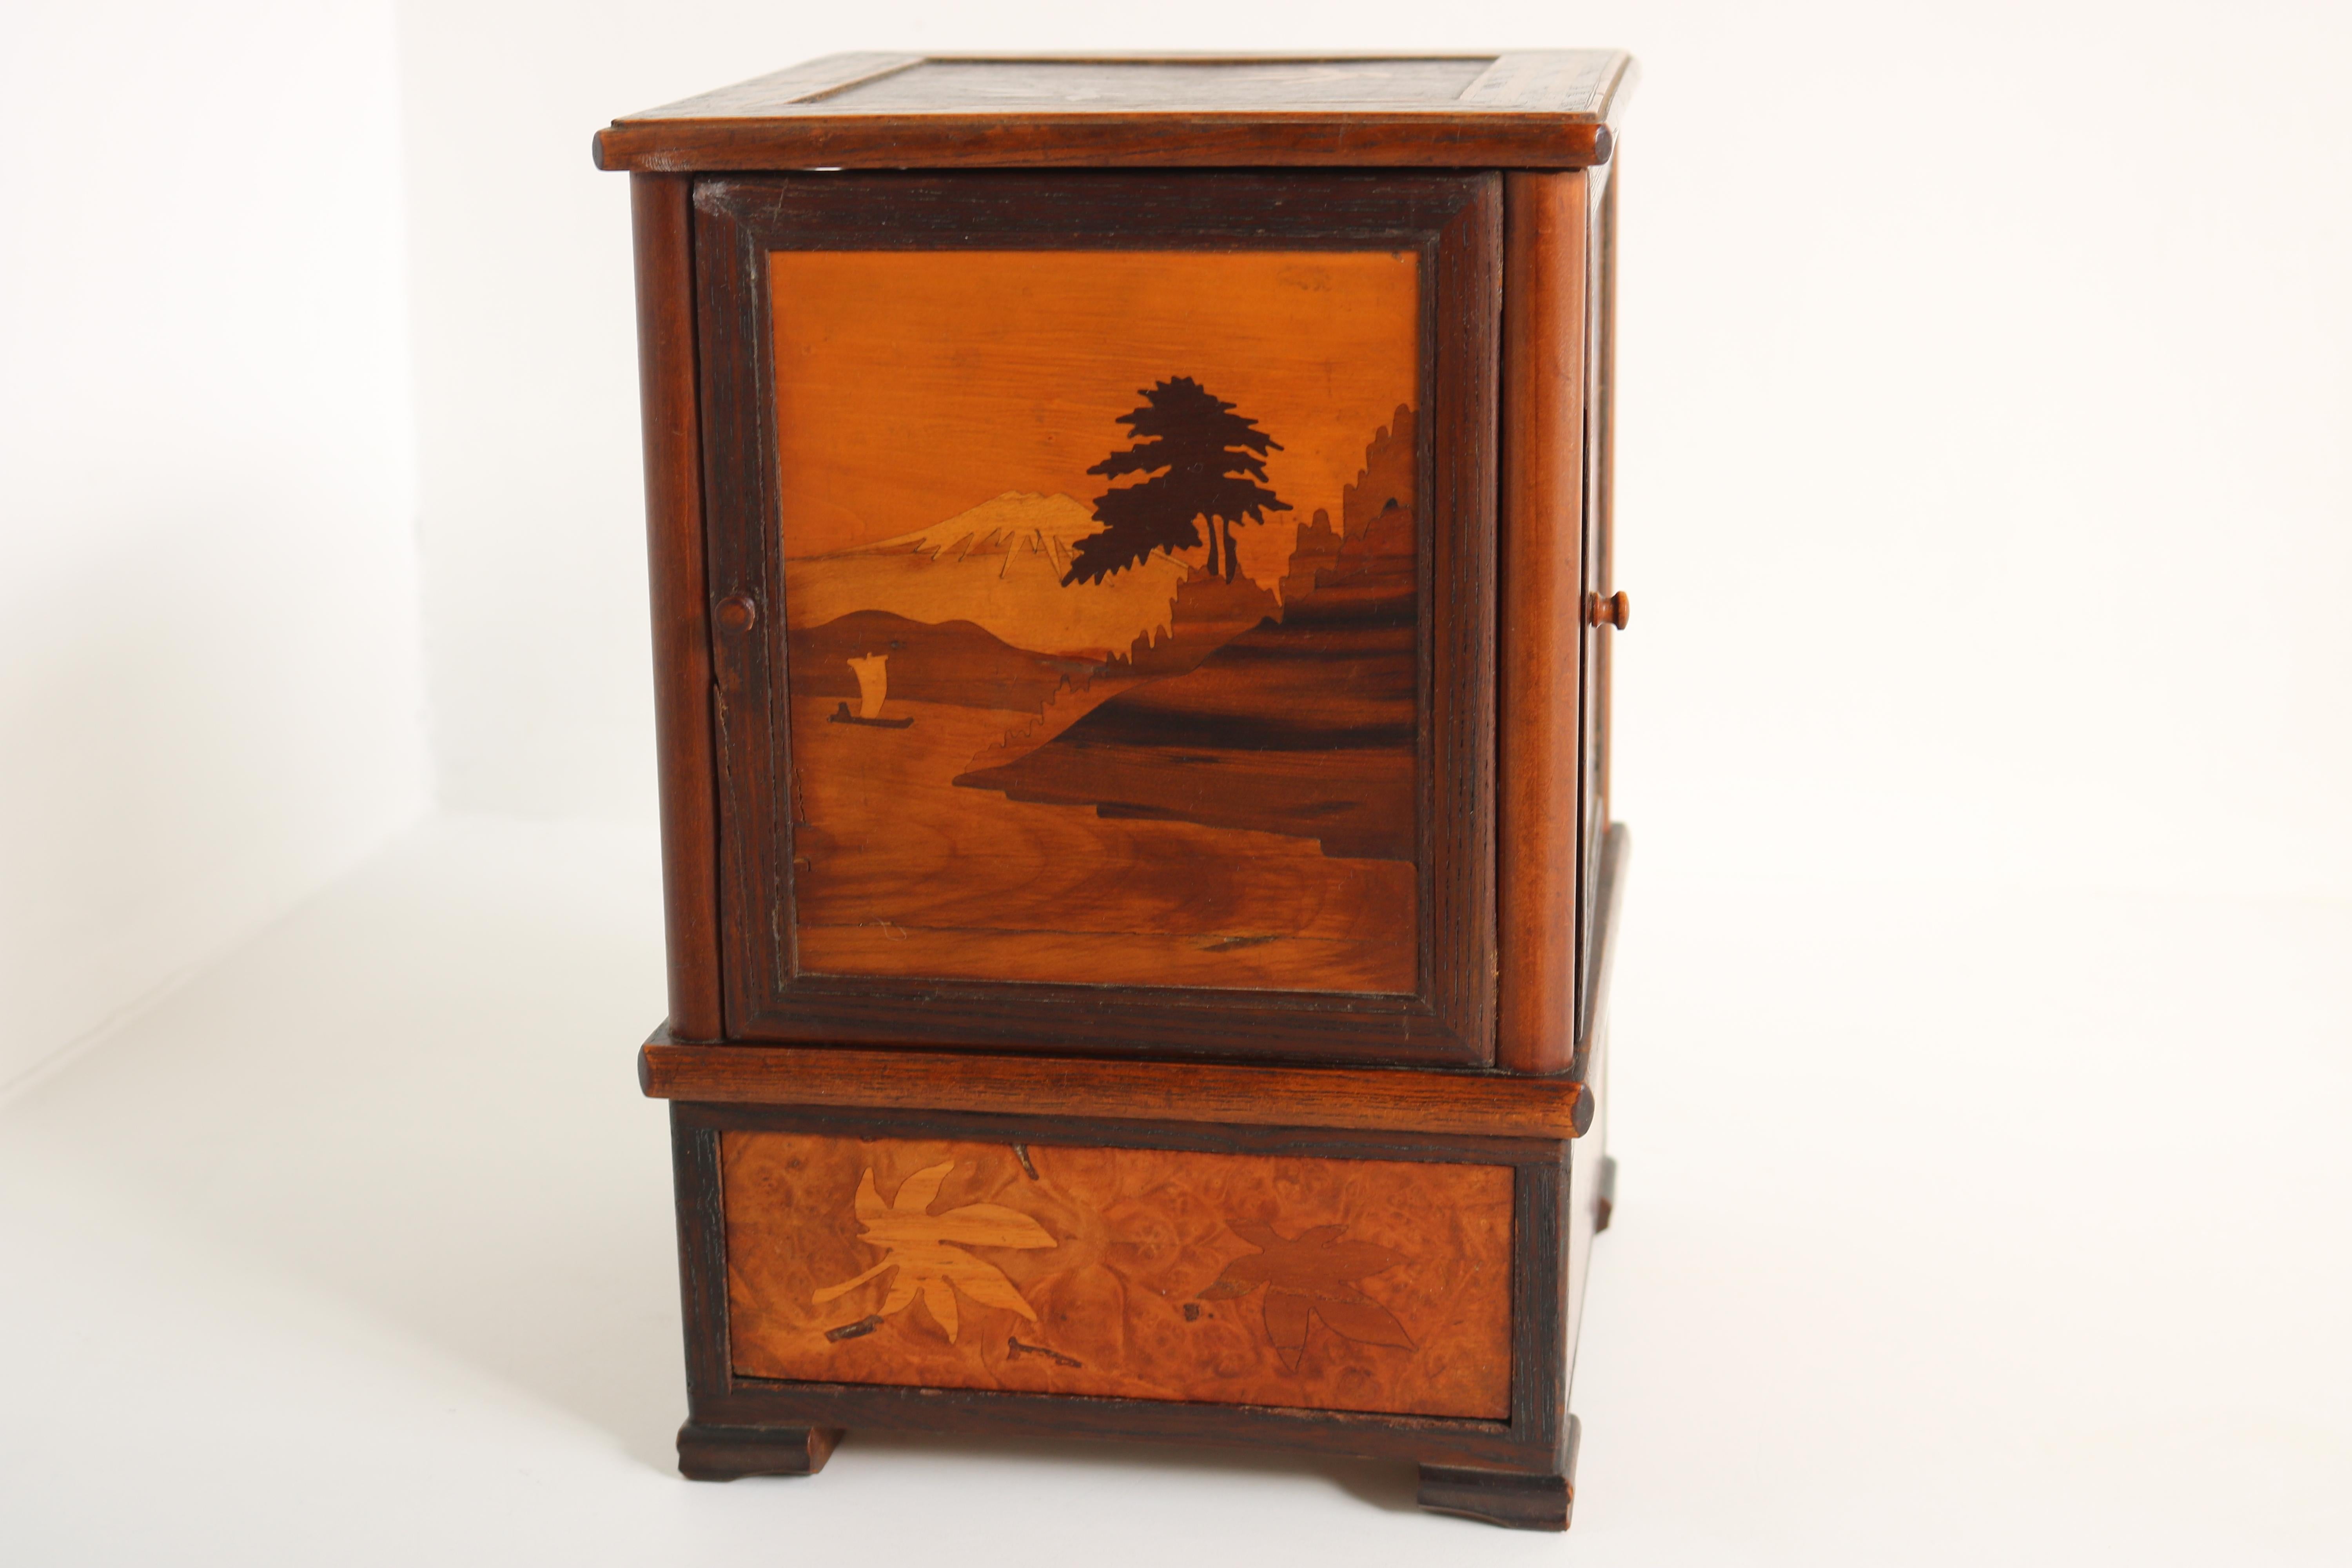 Antique French Inlaid Marquetry Cigar Box 1900 Cigarette Cabinet Desk Decoration For Sale 4